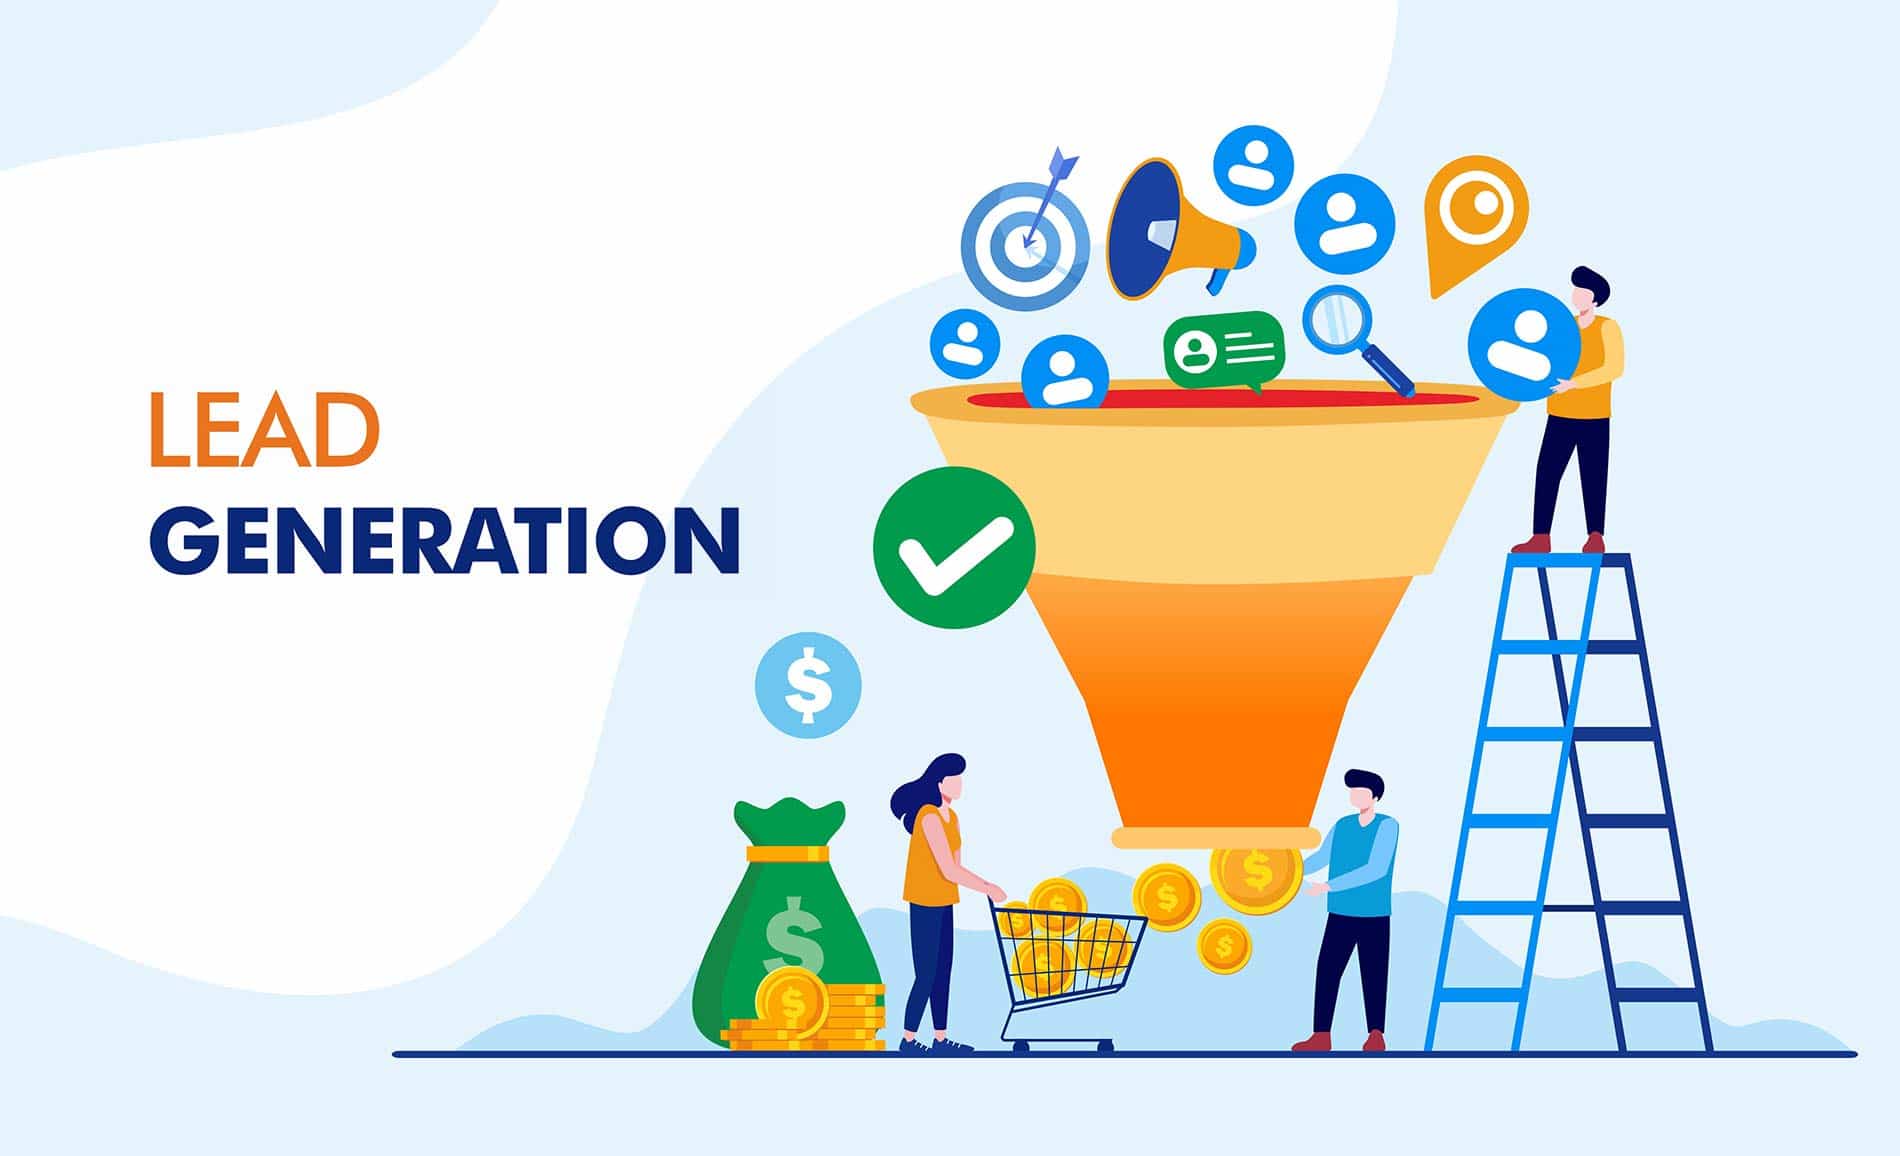 Lead Generation: How to Attract and Convert High-Quality Leads